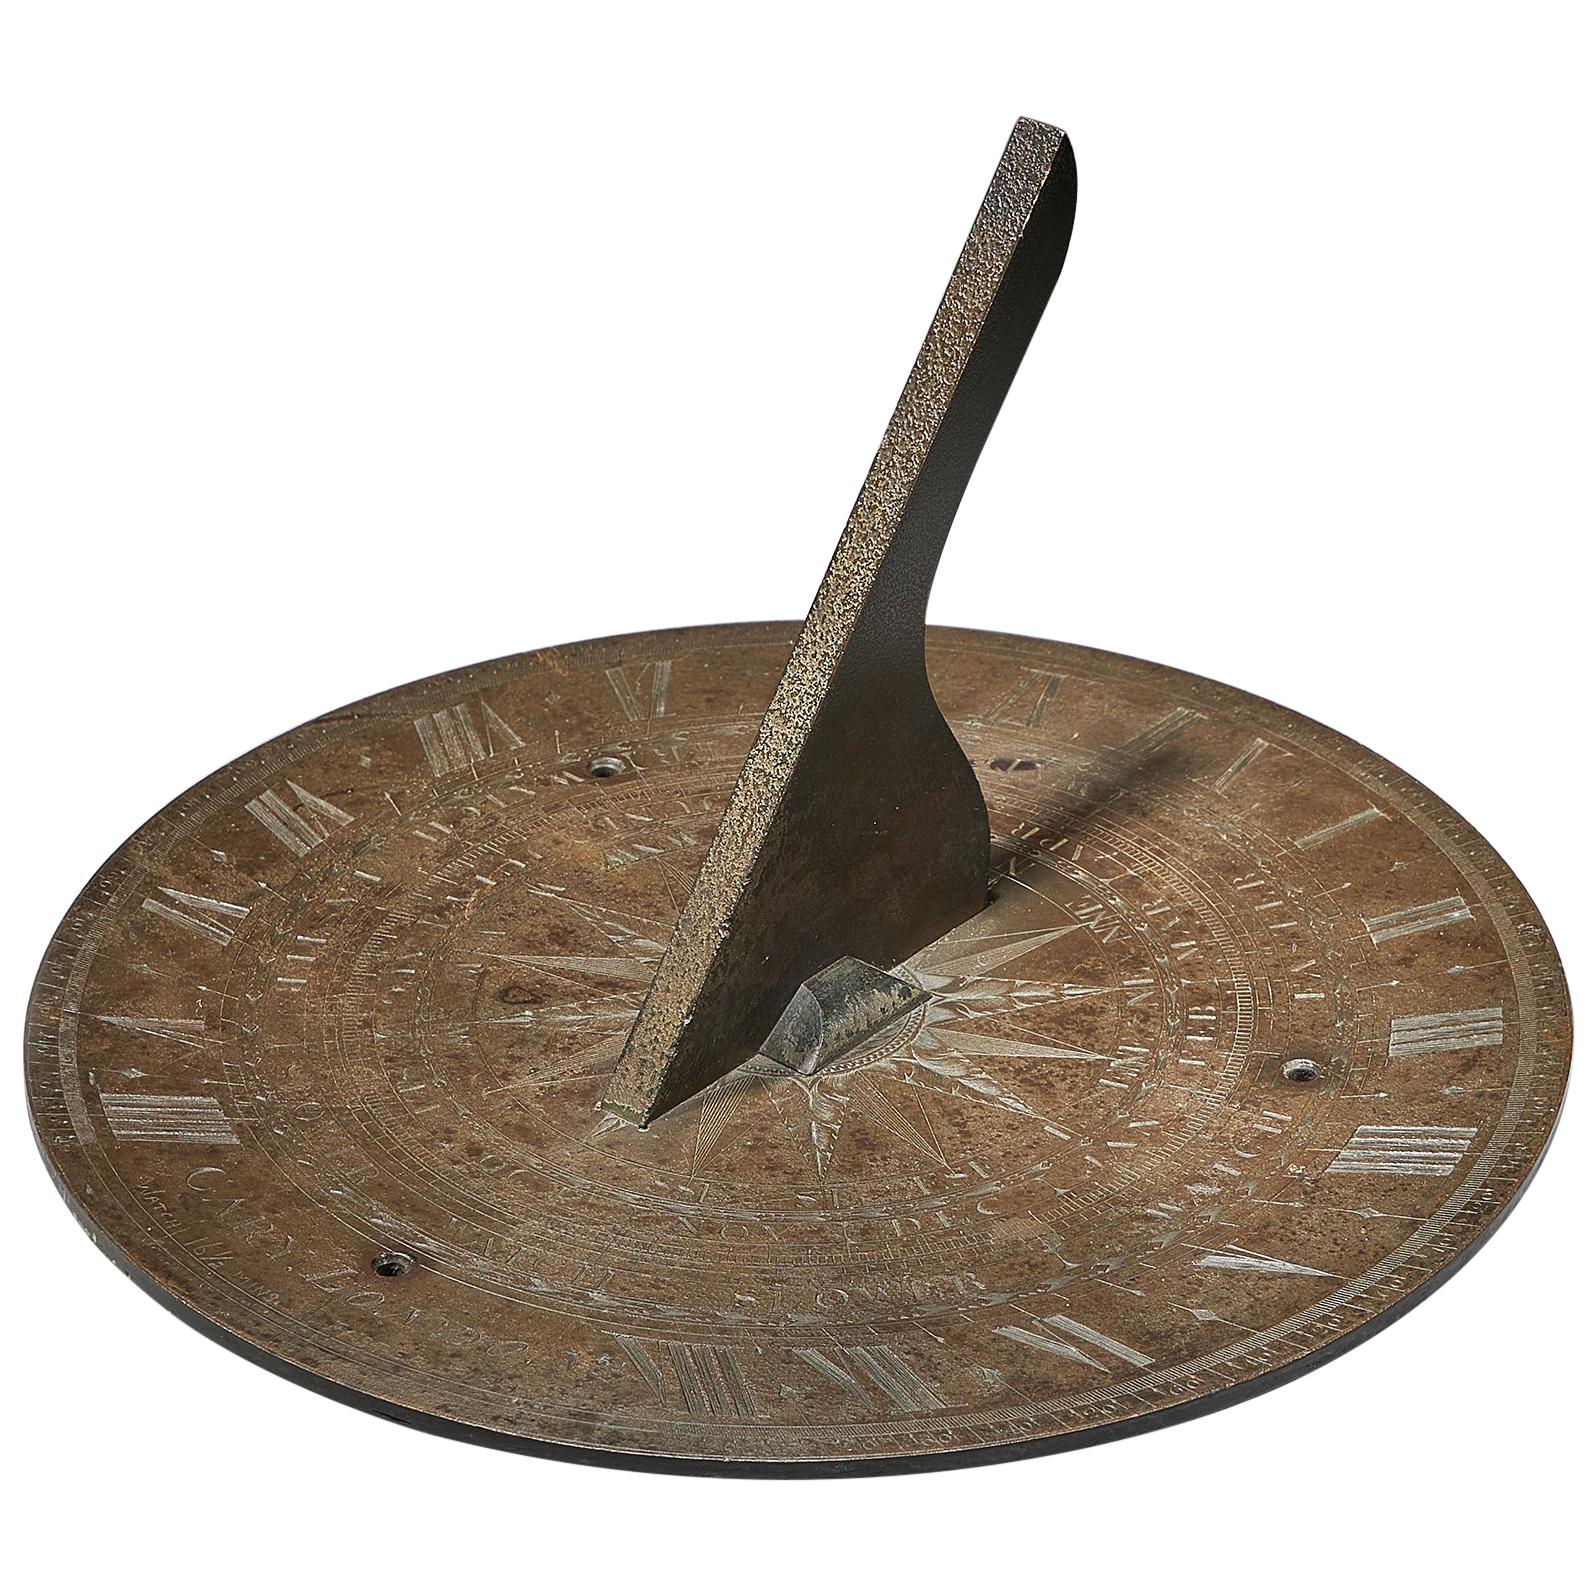 Early 19th Century English Bronze Horizontal Sundial by Cary of London 1